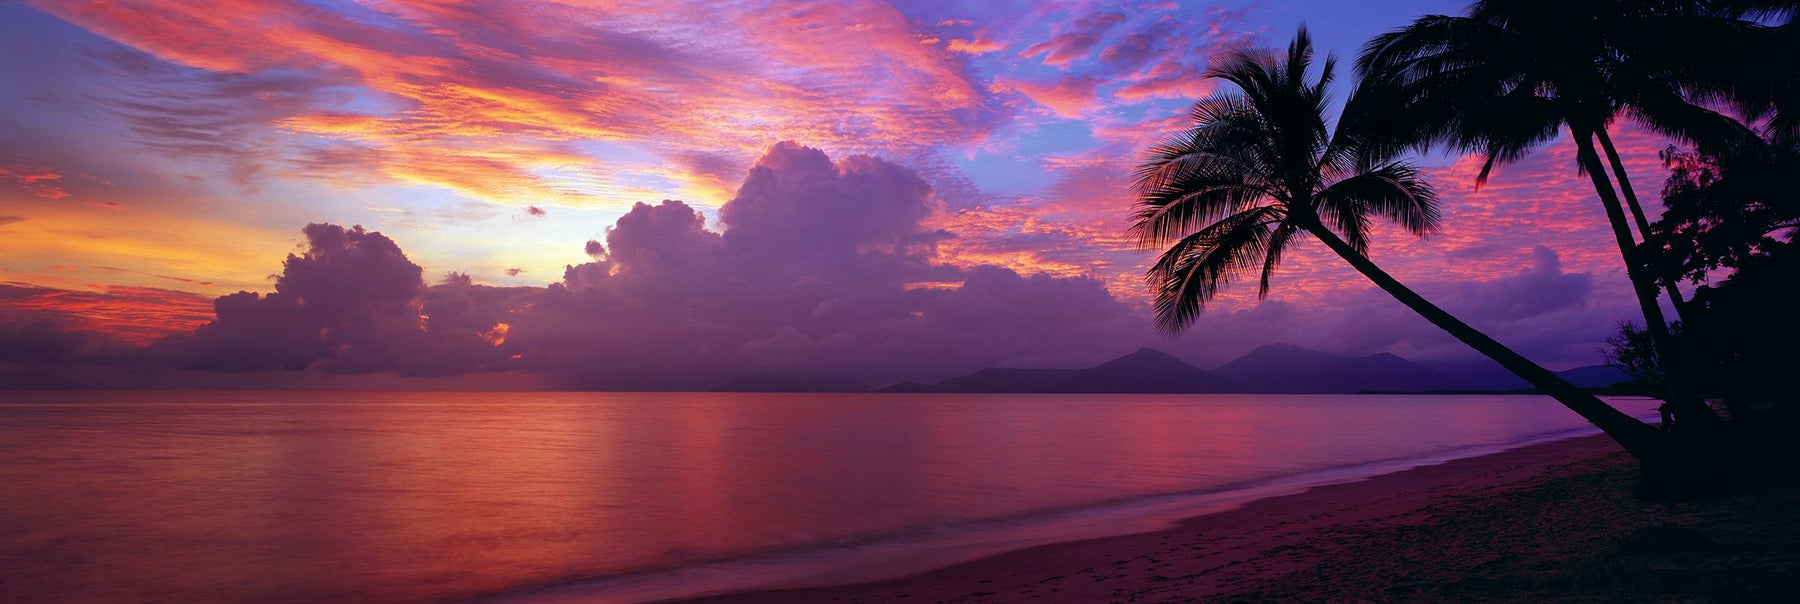 Cloudy pink and purple sunrise with palm trees leaning over the sand beach at Holloways Australia